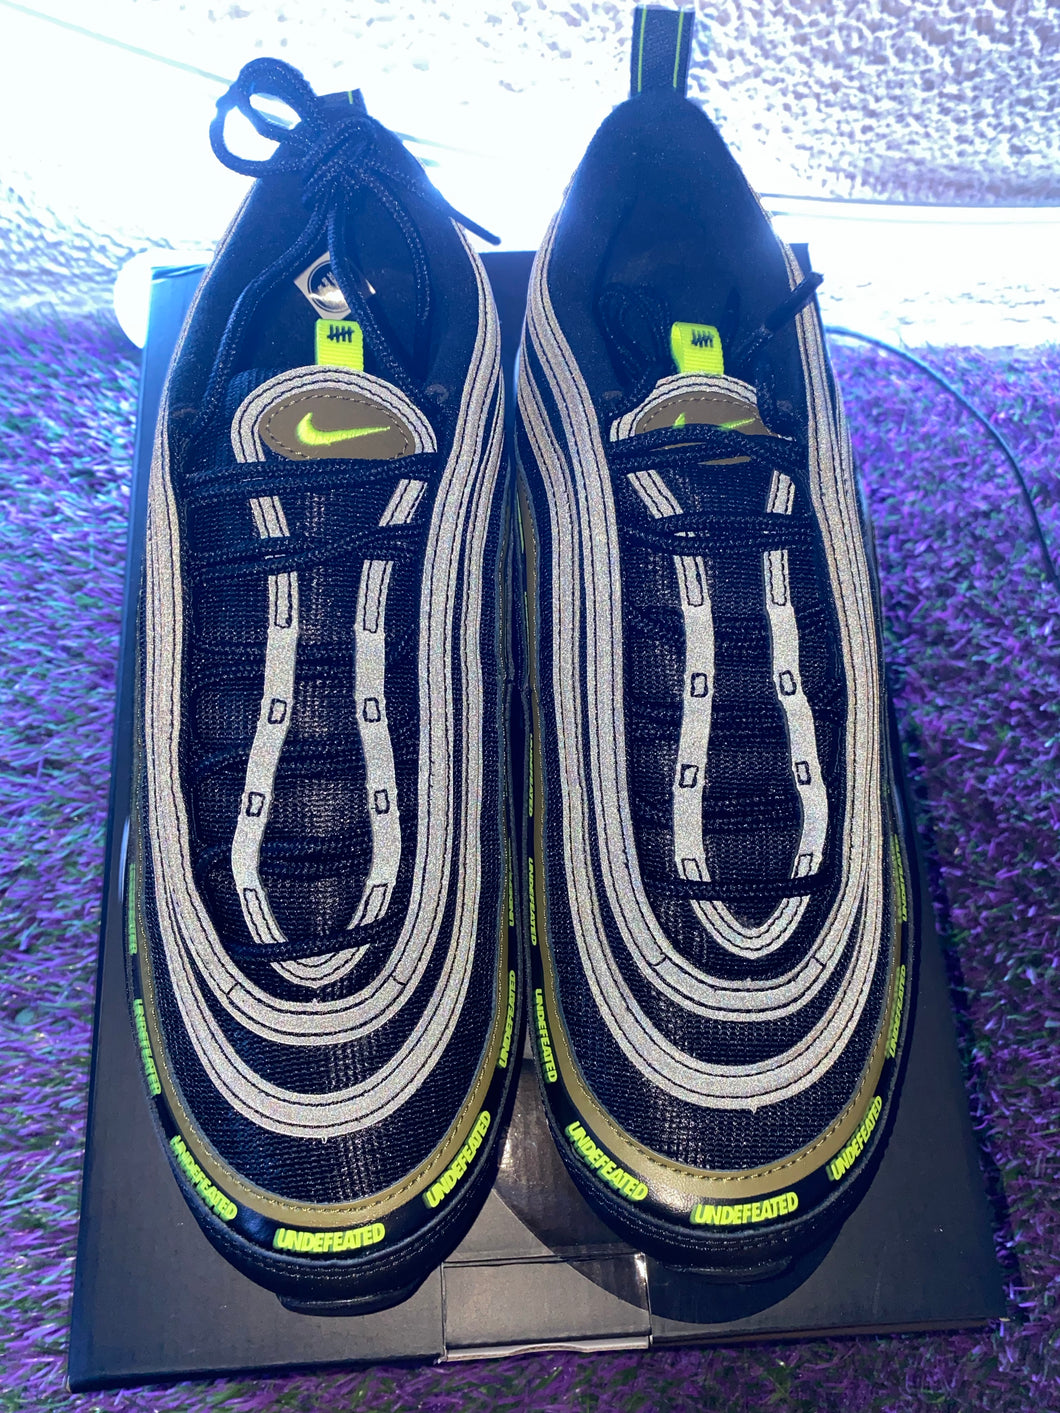 Nike Air Max 97 Undefeated size 9